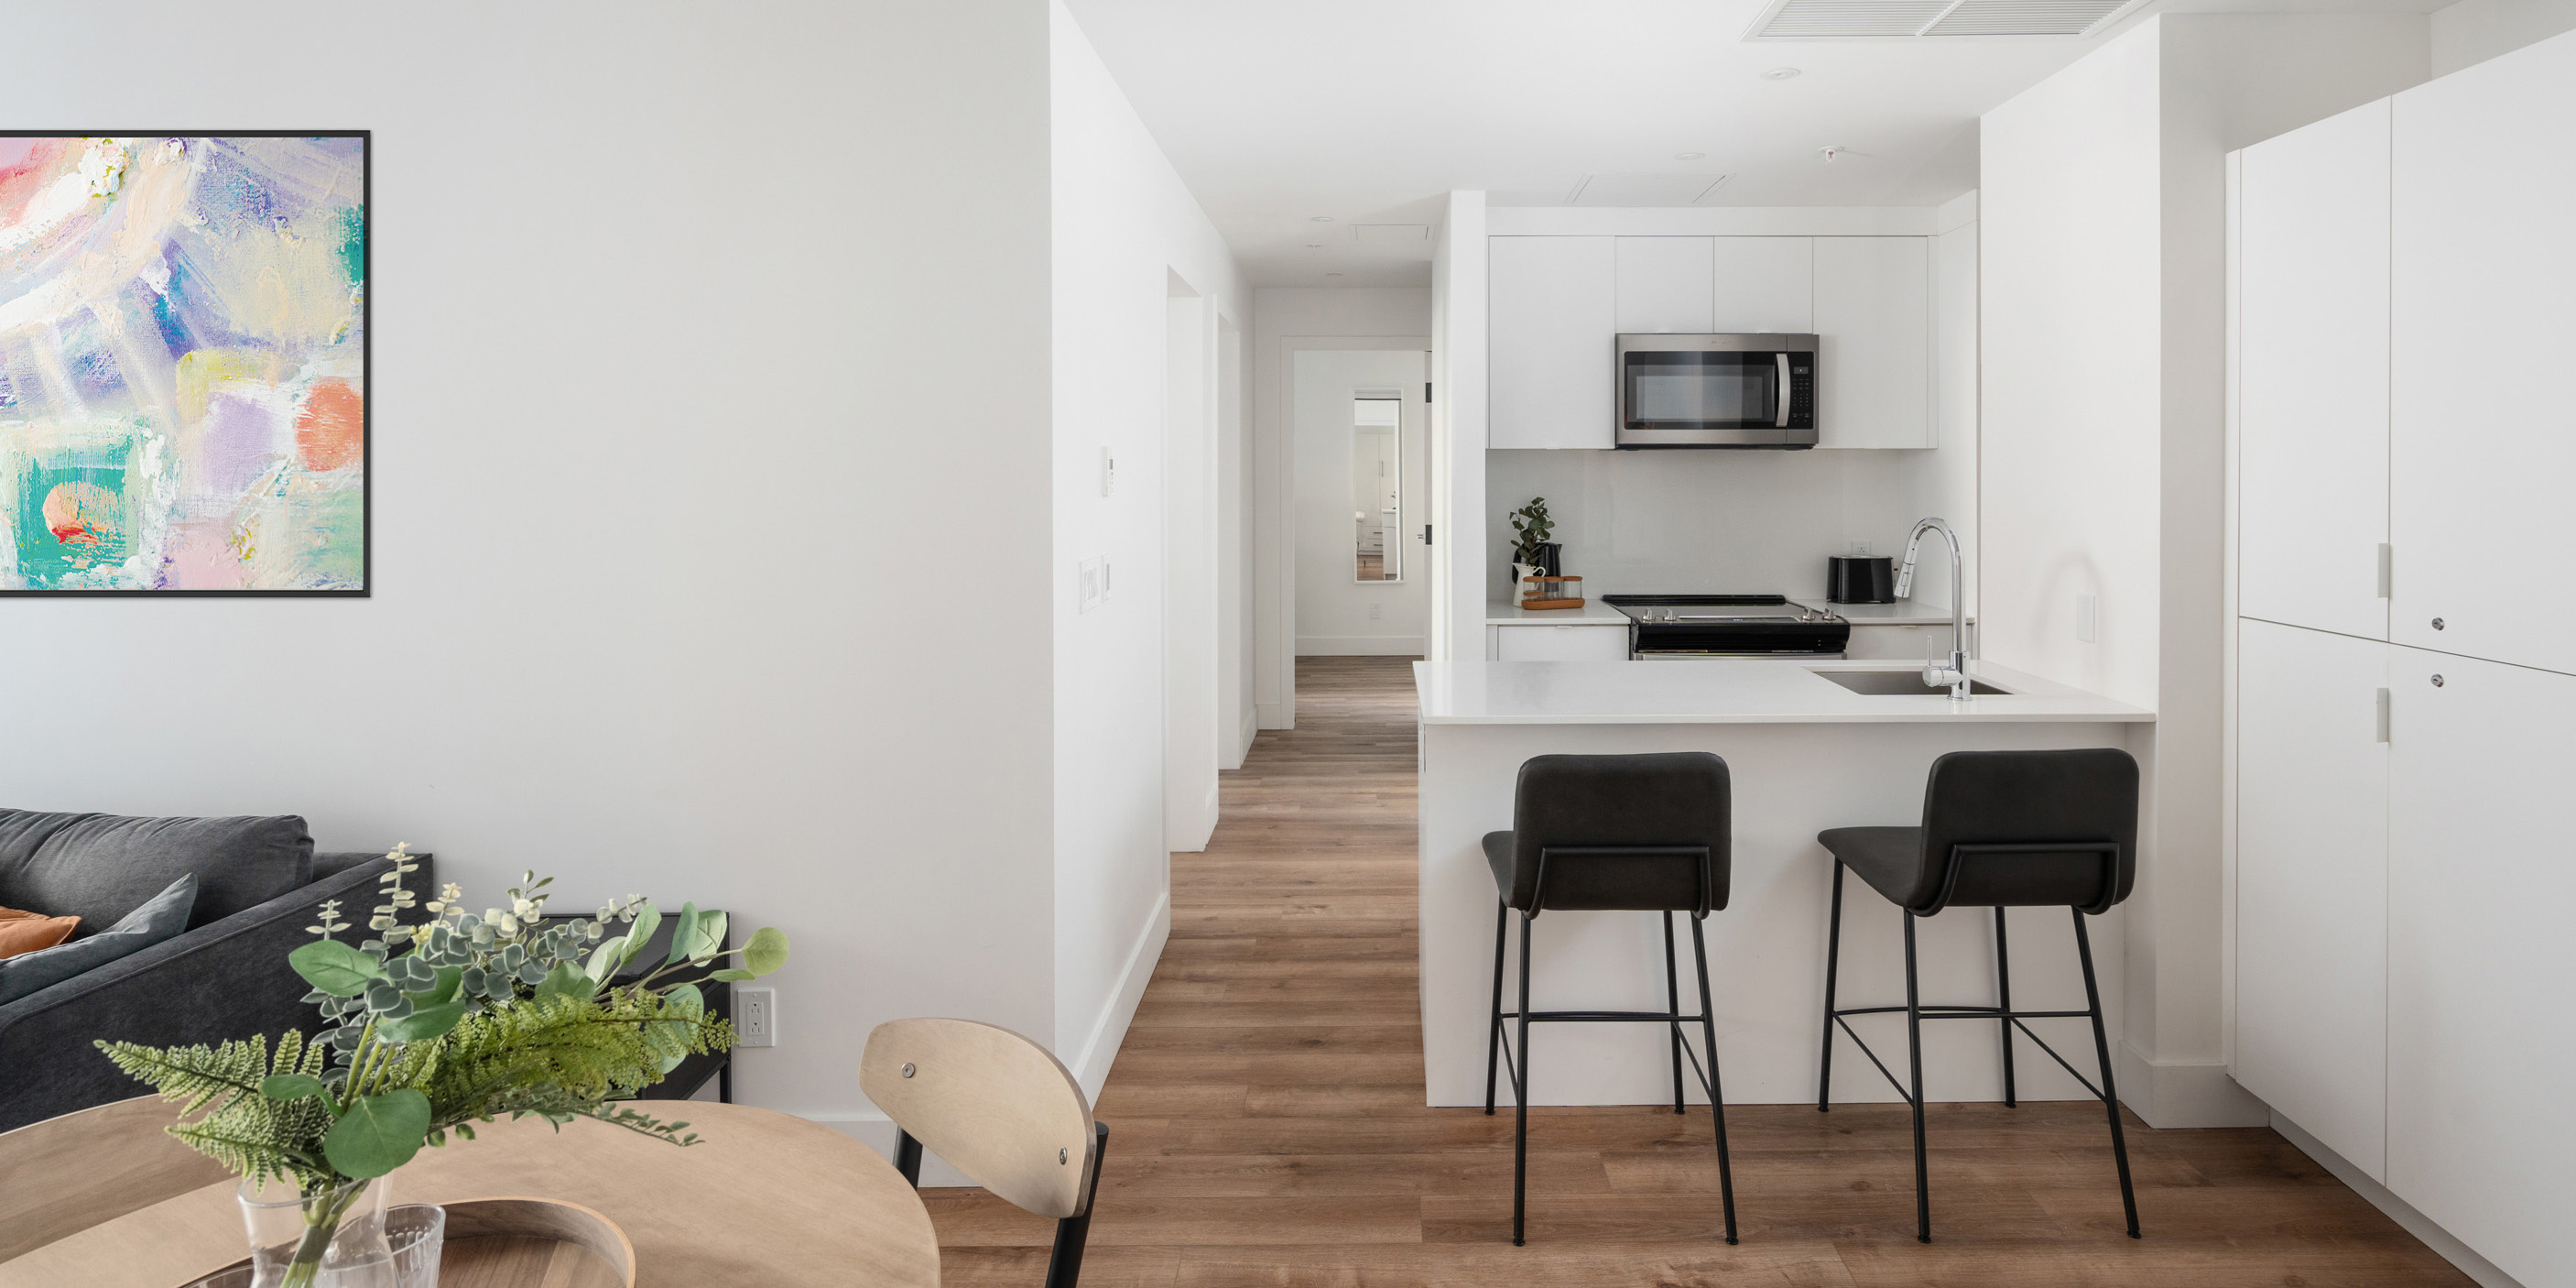 Kitchen and living area of student rental in Montreal